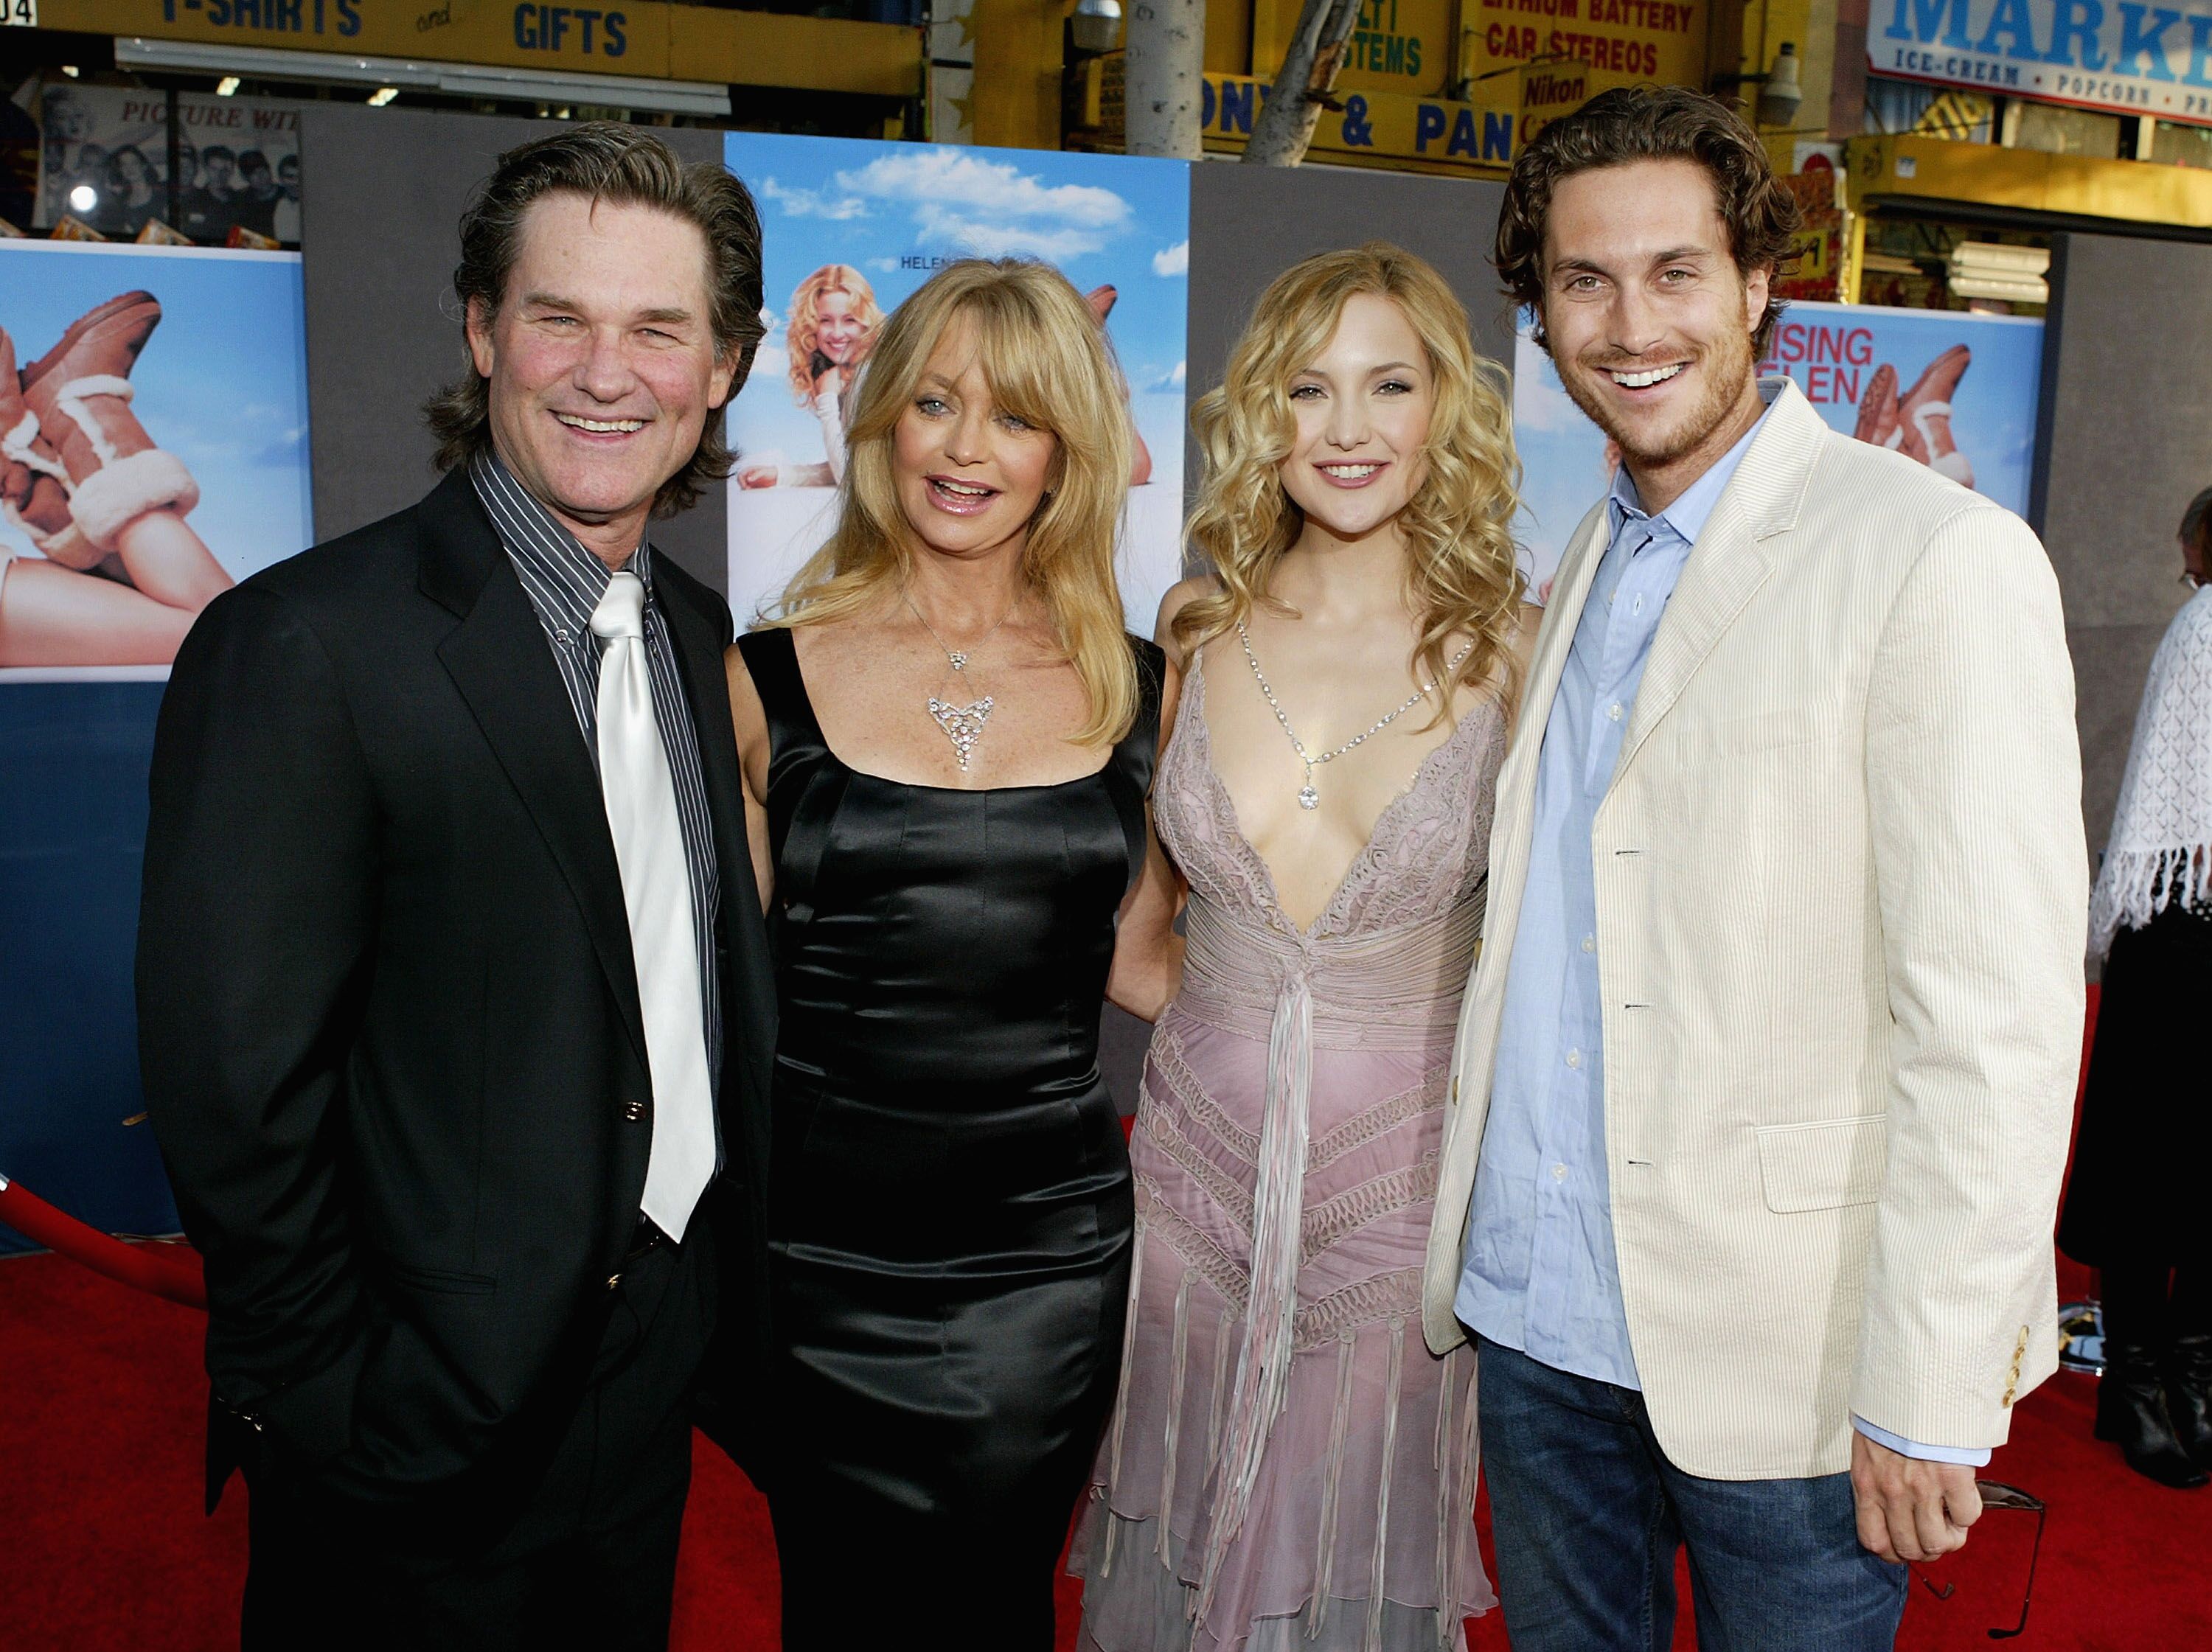  Kurt Russell, his partner, actress Goldie Hawn, and her children, actress Kate Hudson and actor Oliver Hudson, attend the film premiere of the romantic comedy "Raising Helen." | Source: Getty Images